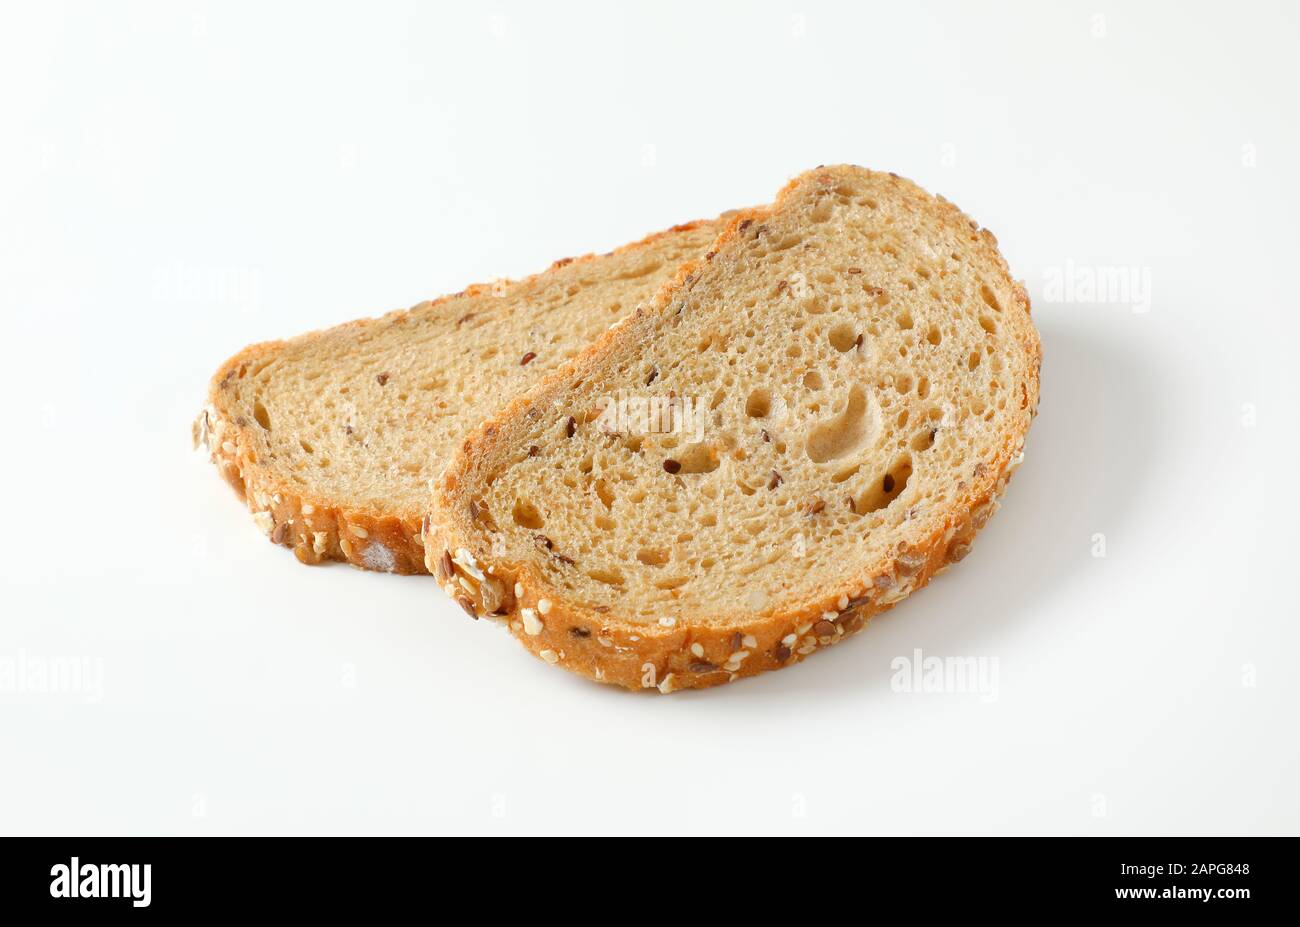 Two slices of whole grain bread, crust topped with rolled oats and seeds (flax, sesame, sunflower) Stock Photo